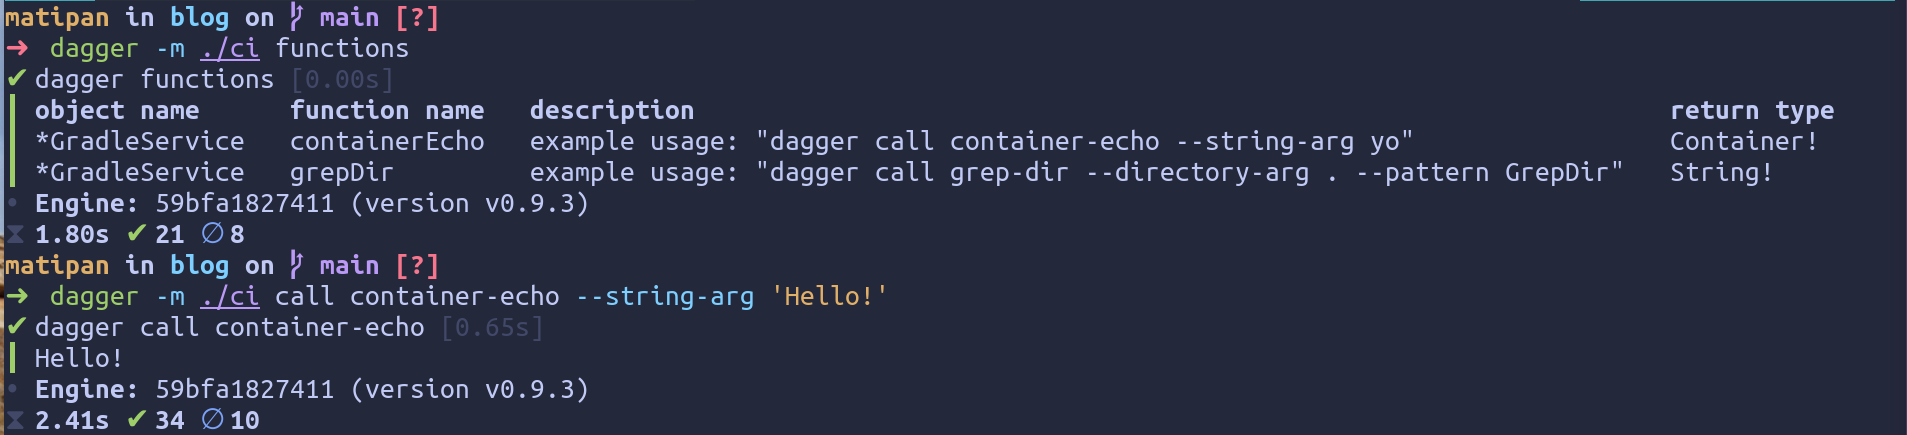 screenshot of a terminal showing the usage of dagger 